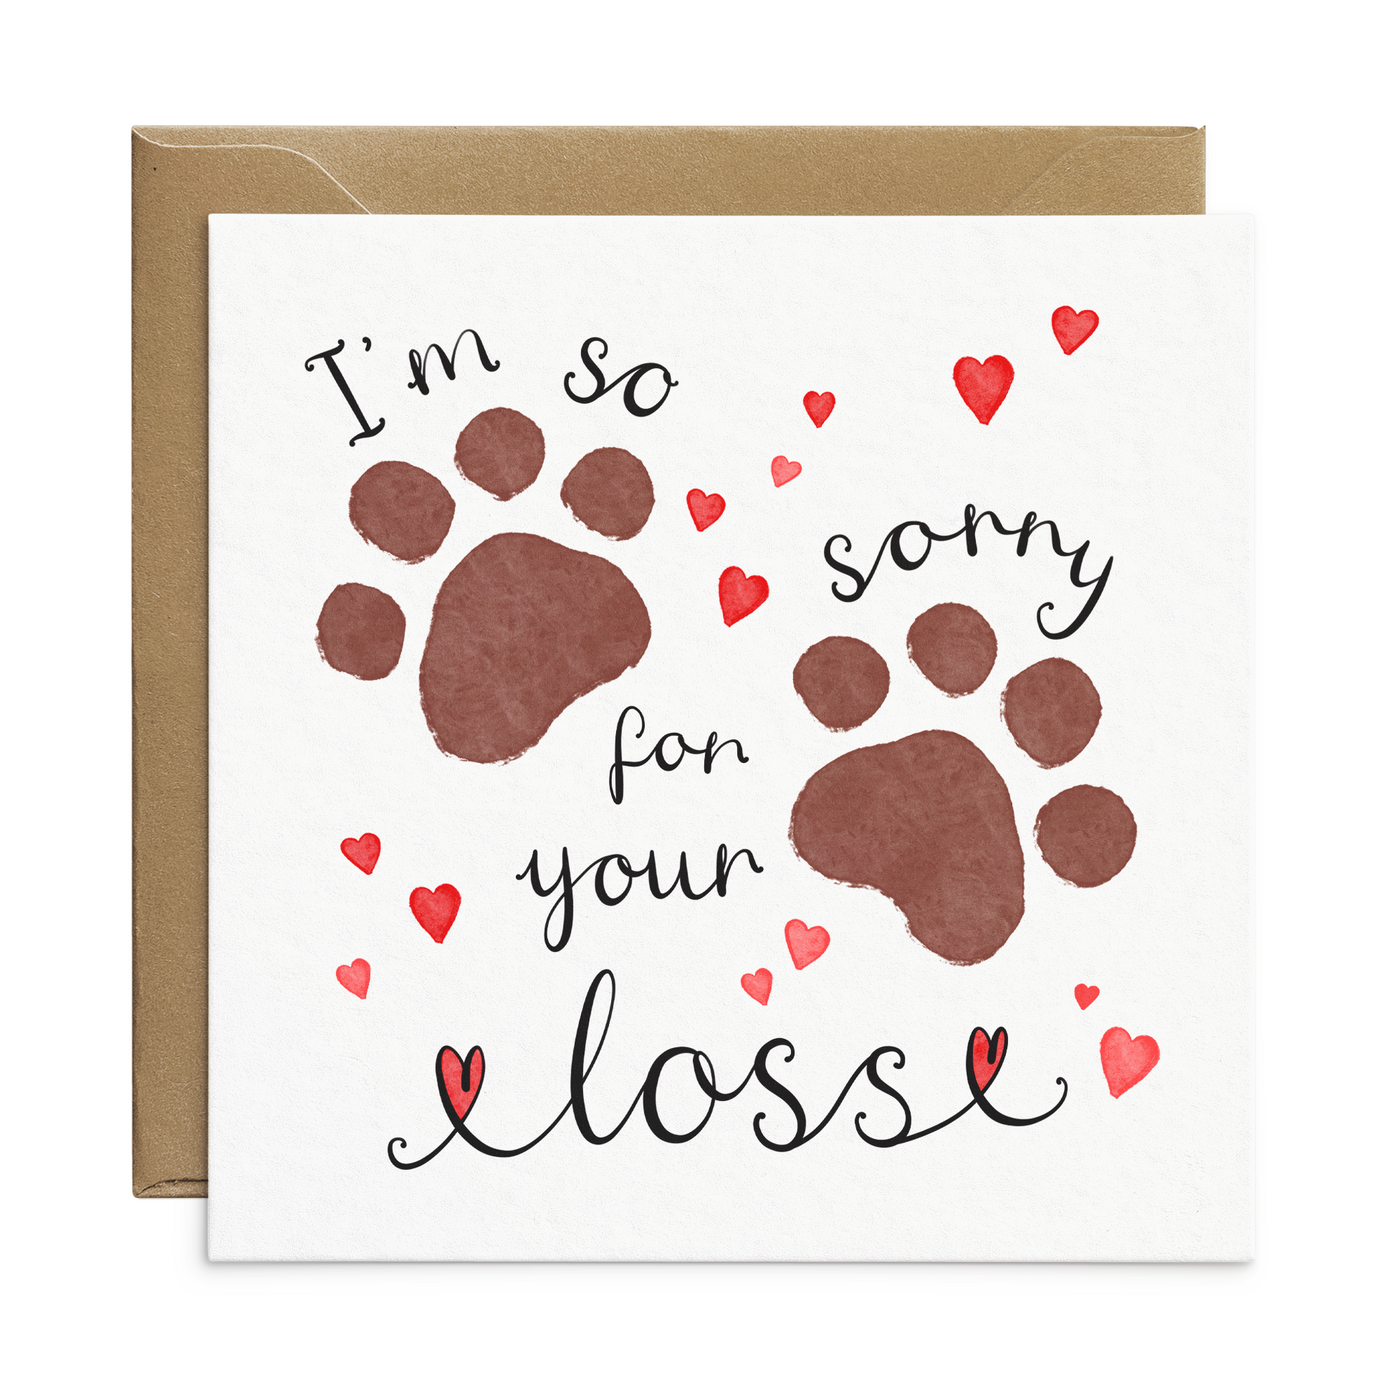 Muddy paw prints pet bereavement greetings card by Poppins and Co